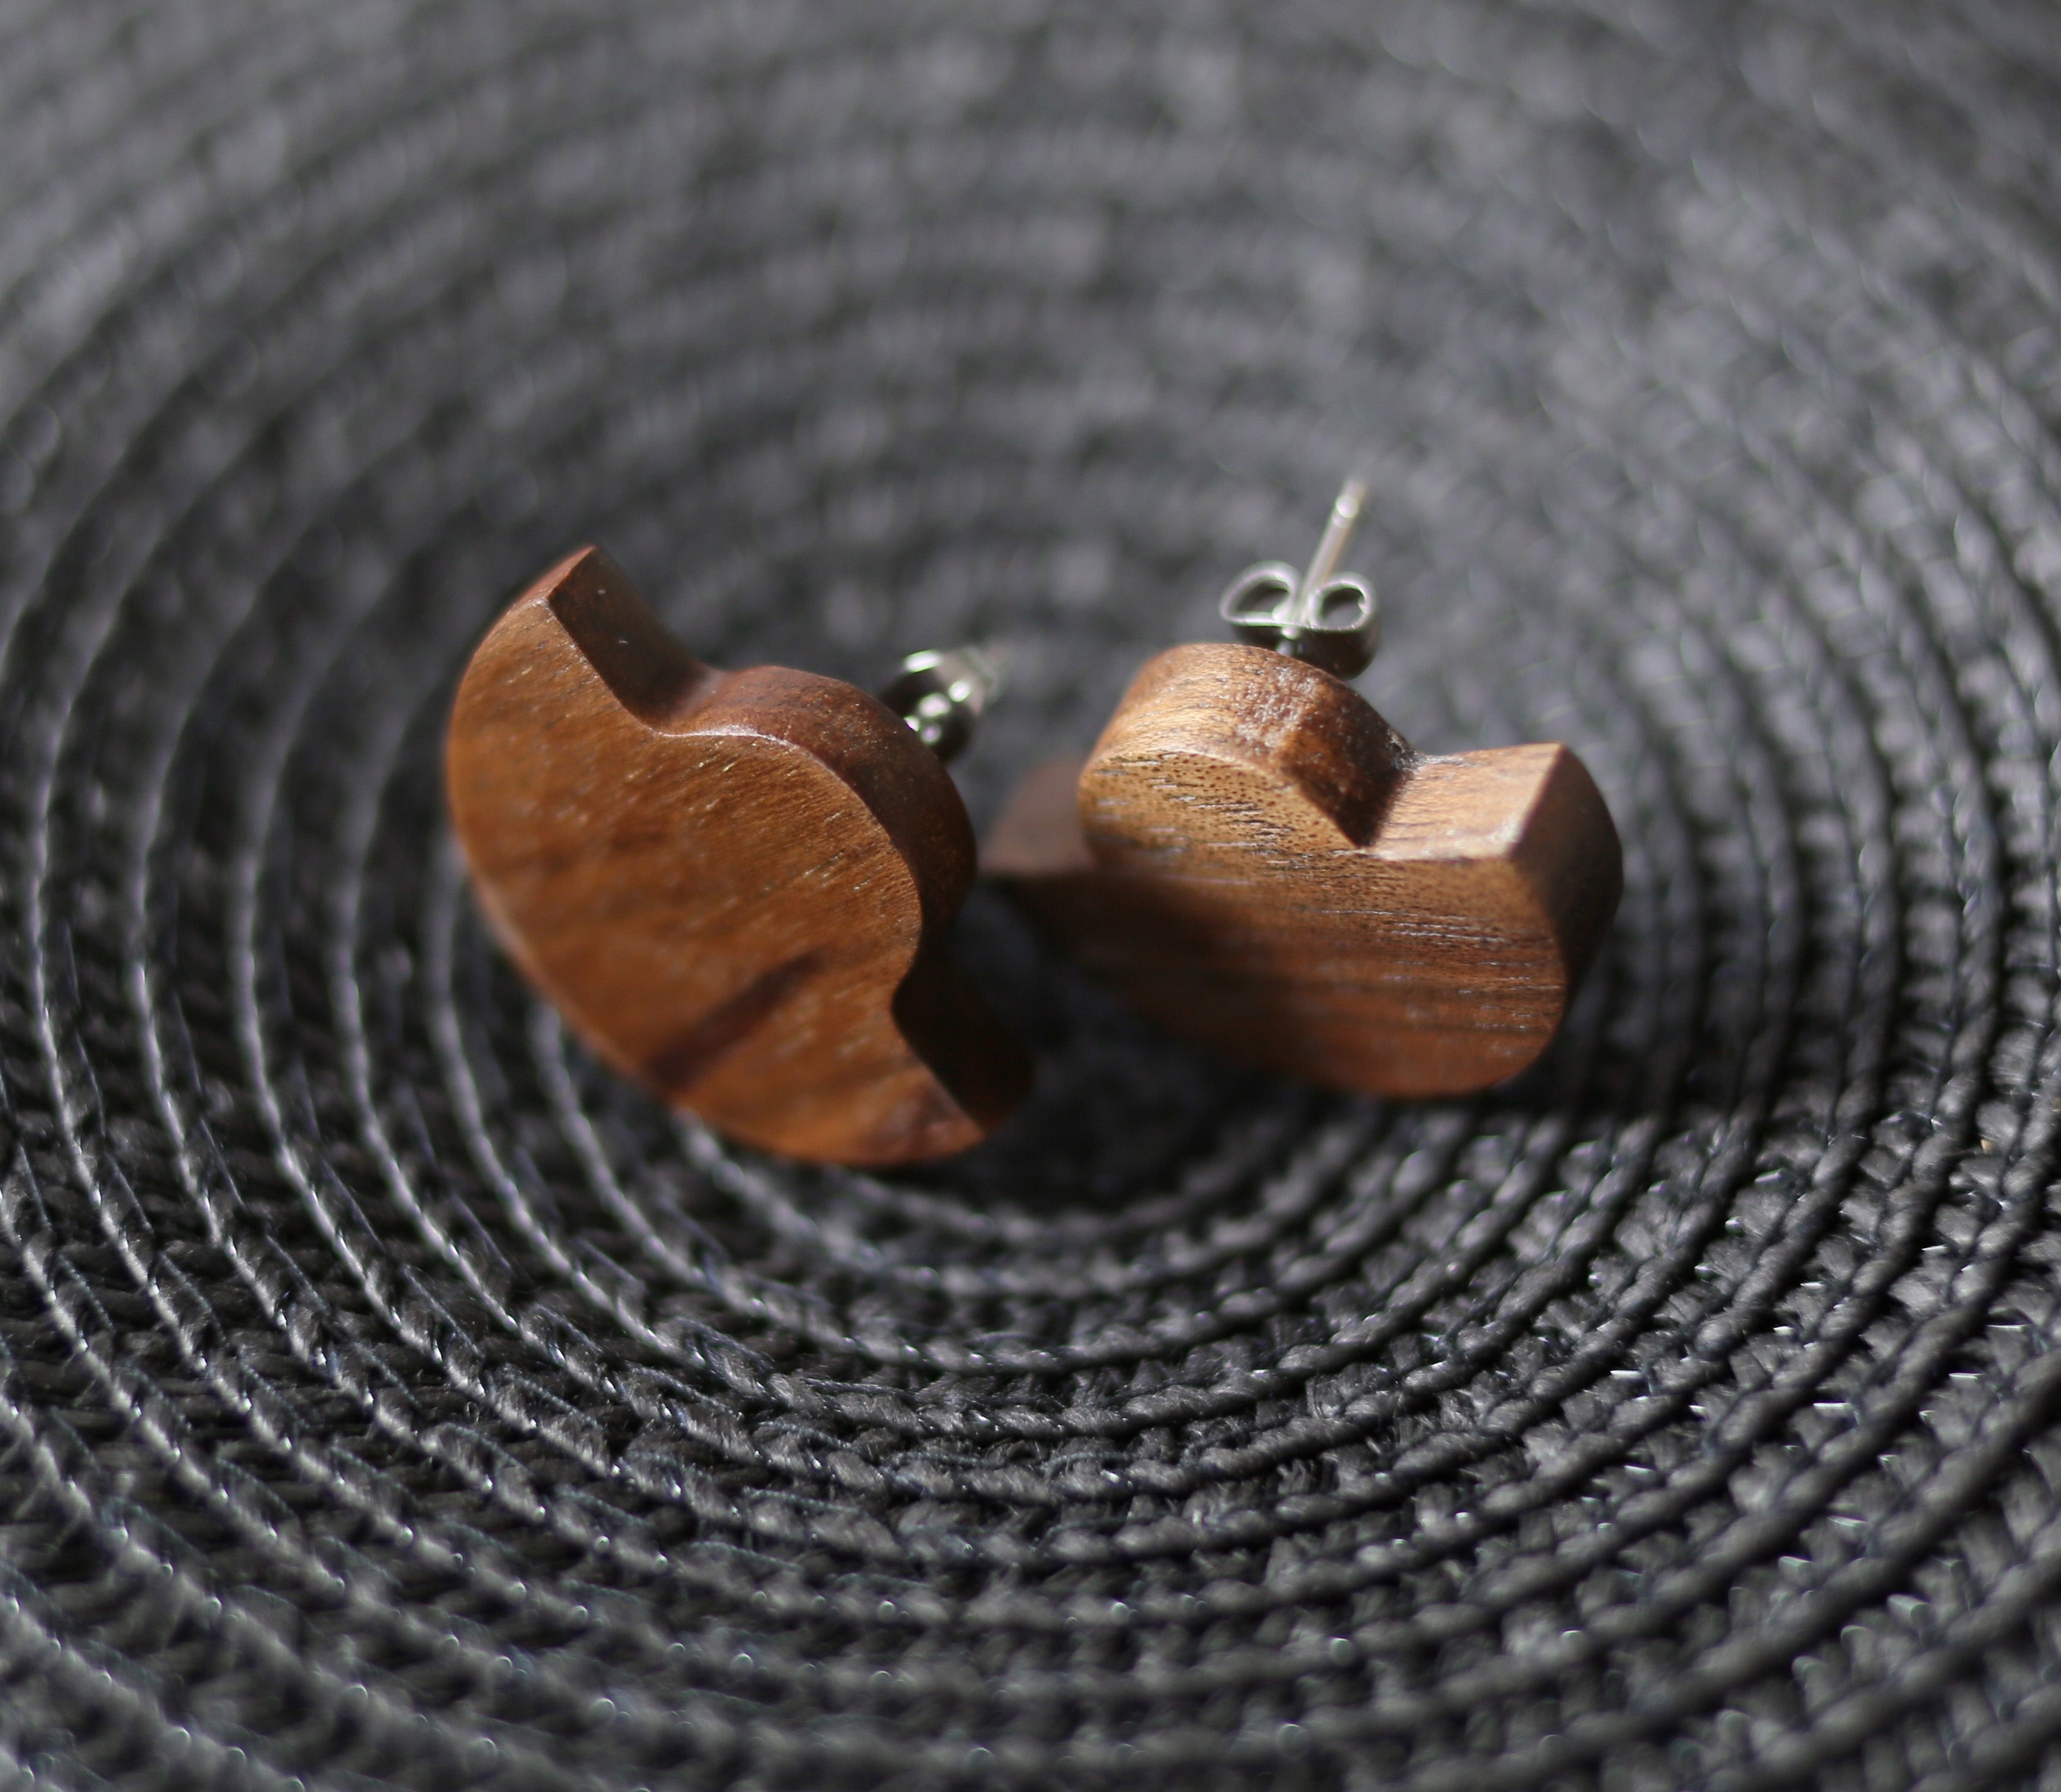 Wood jewelry set, Wooden studs mayan earrings or natural wood earring with hypoallergenic studs, Ethnic stud earrings in wooden jewelry